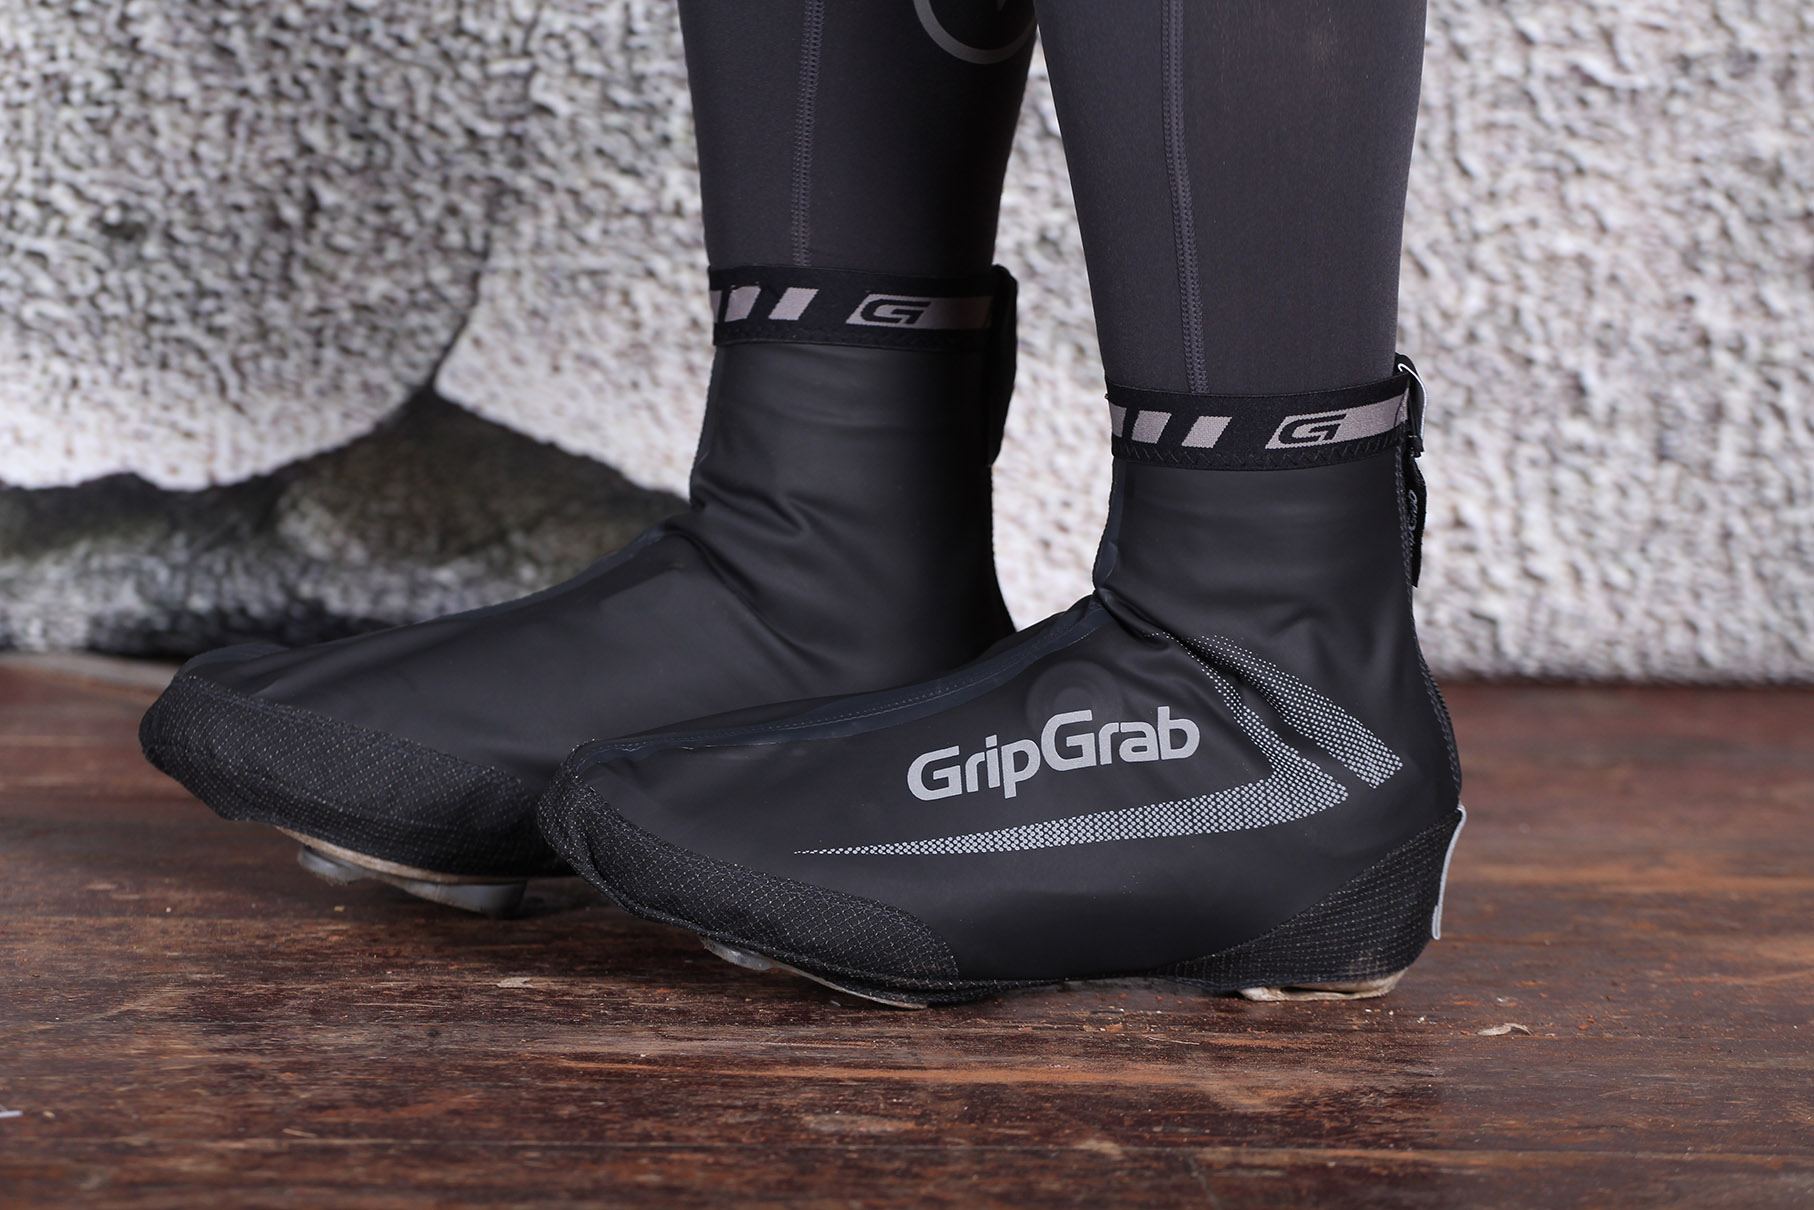 gripgrab shoe covers